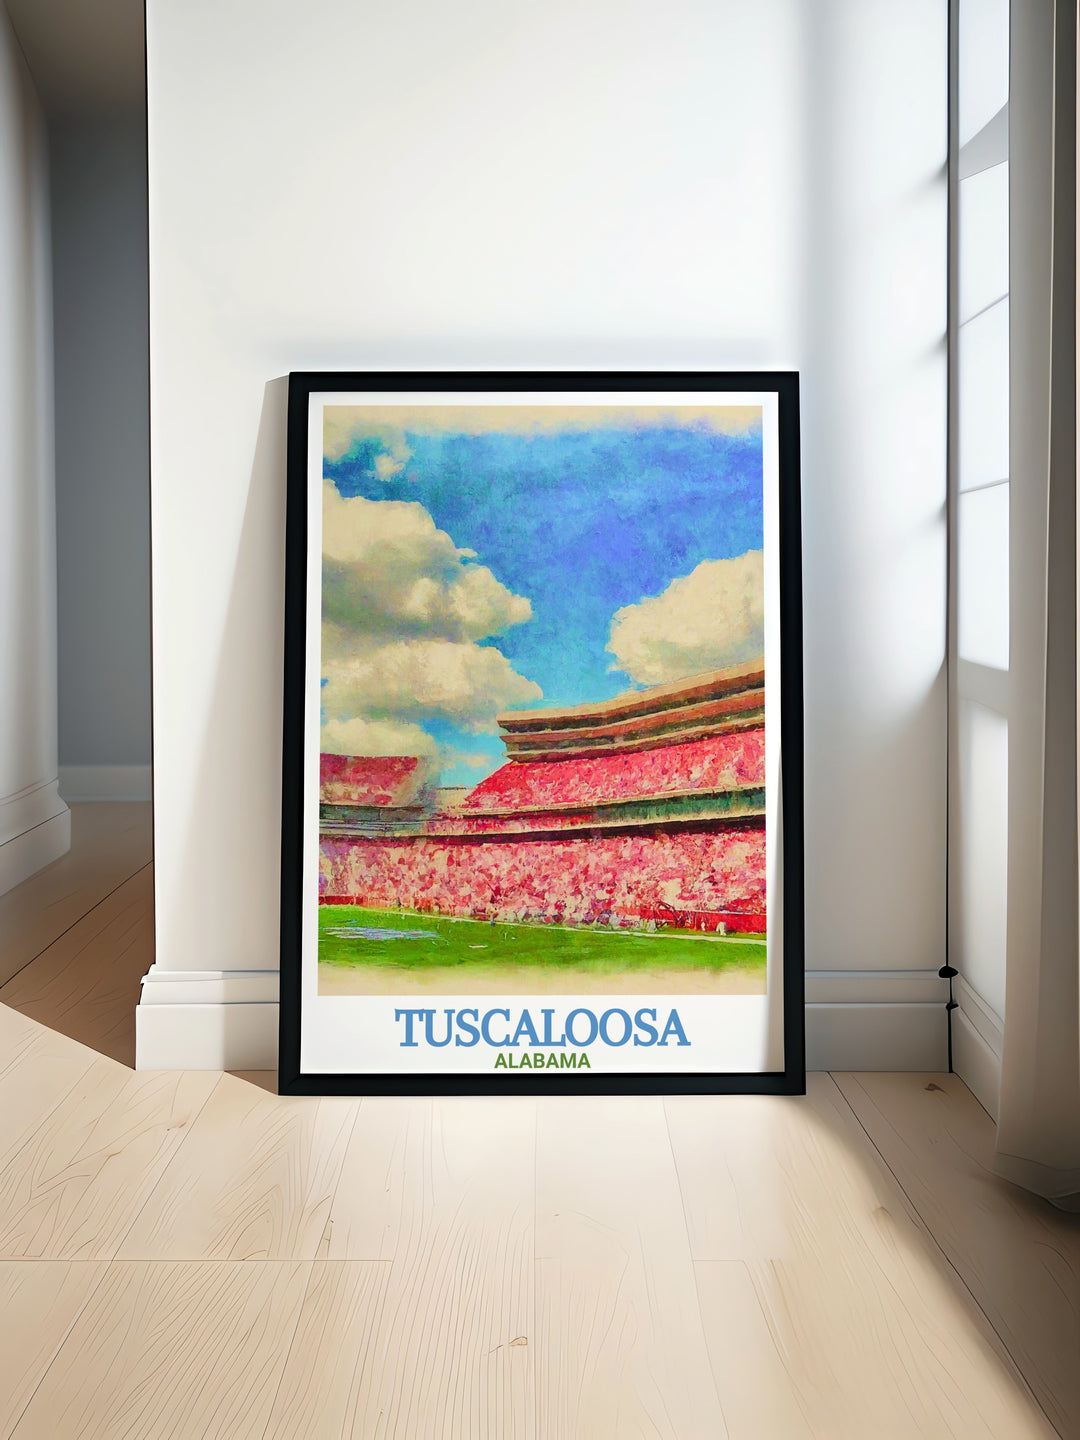 Alabama poster featuring a vibrant view of Tuscaloosa skyline and iconic Bryant Denny Stadium perfect for Tuscaloosa decor and gifts bringing the citys charm and energy into any home or office with stunning Tuscaloosa wall art and modern prints.